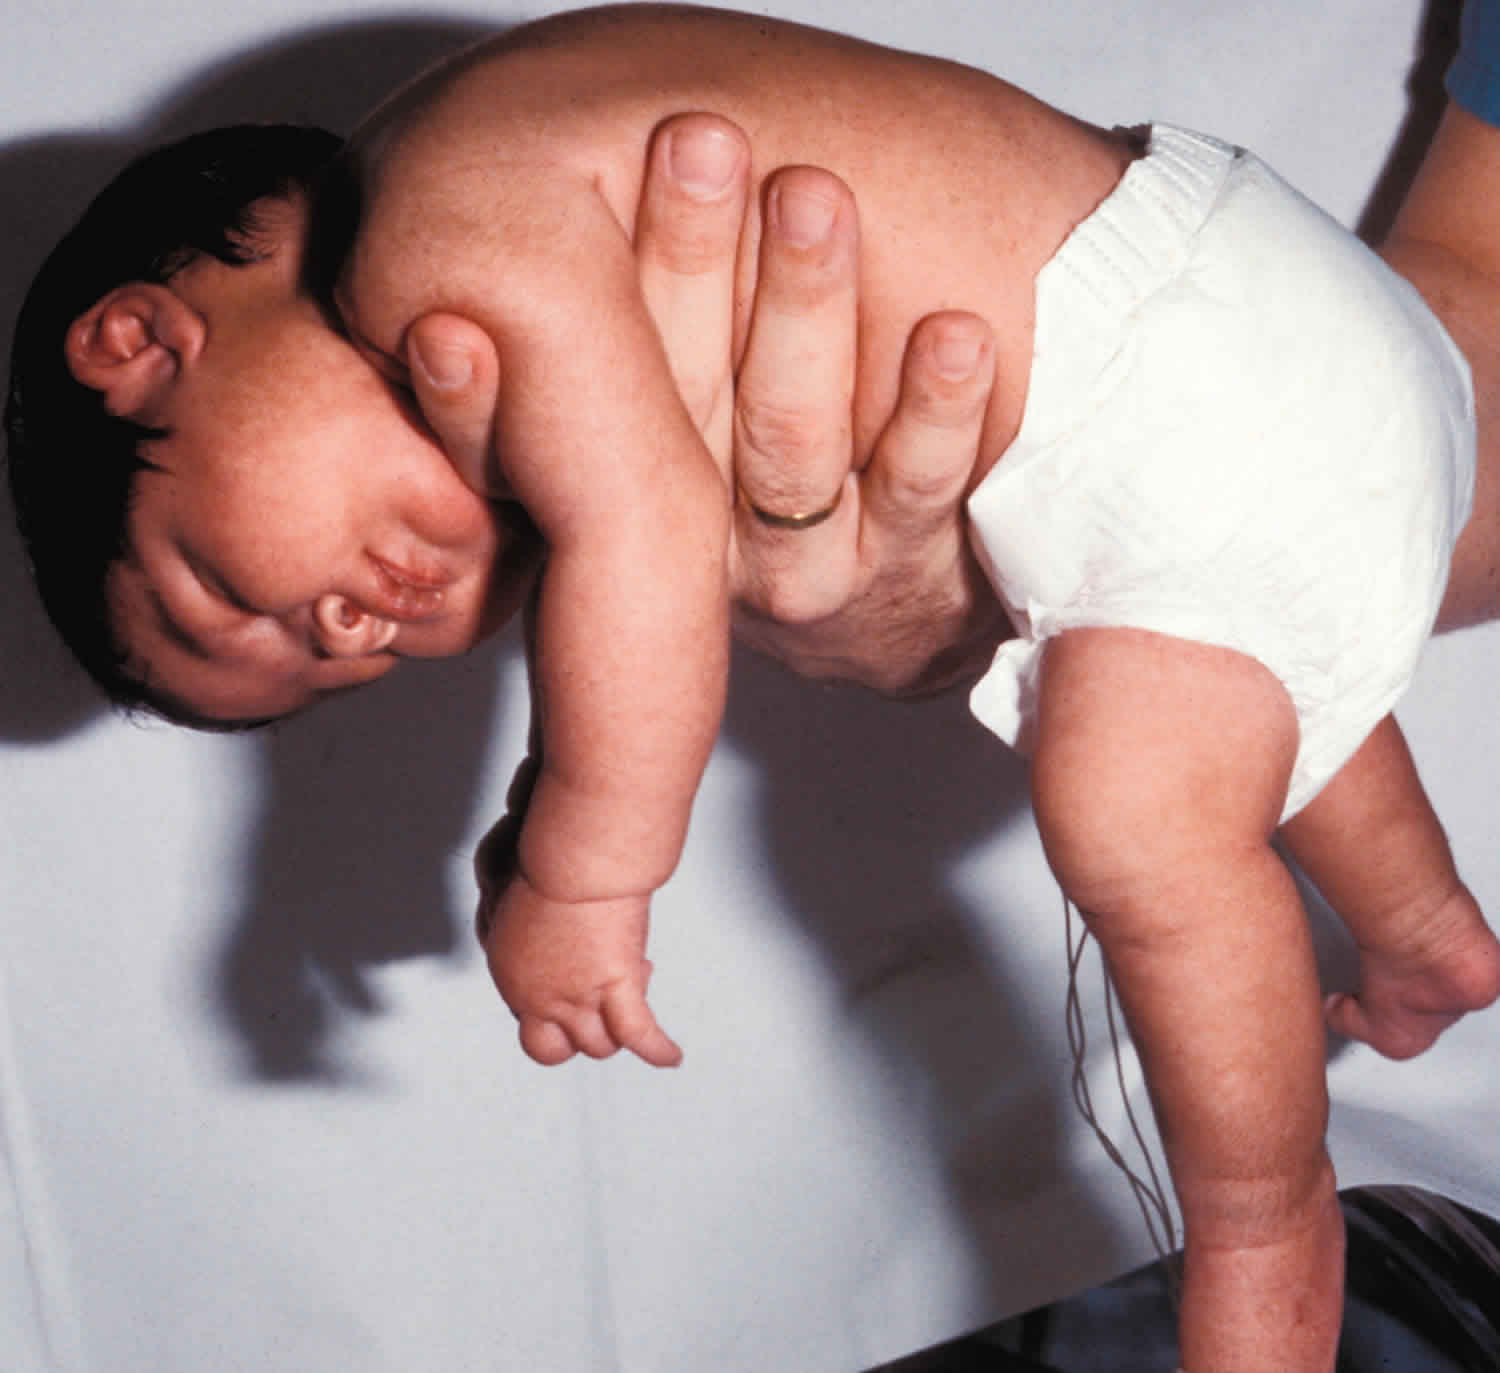 Floppy baby syndrome causes, signs, symptoms, diagnosis ...